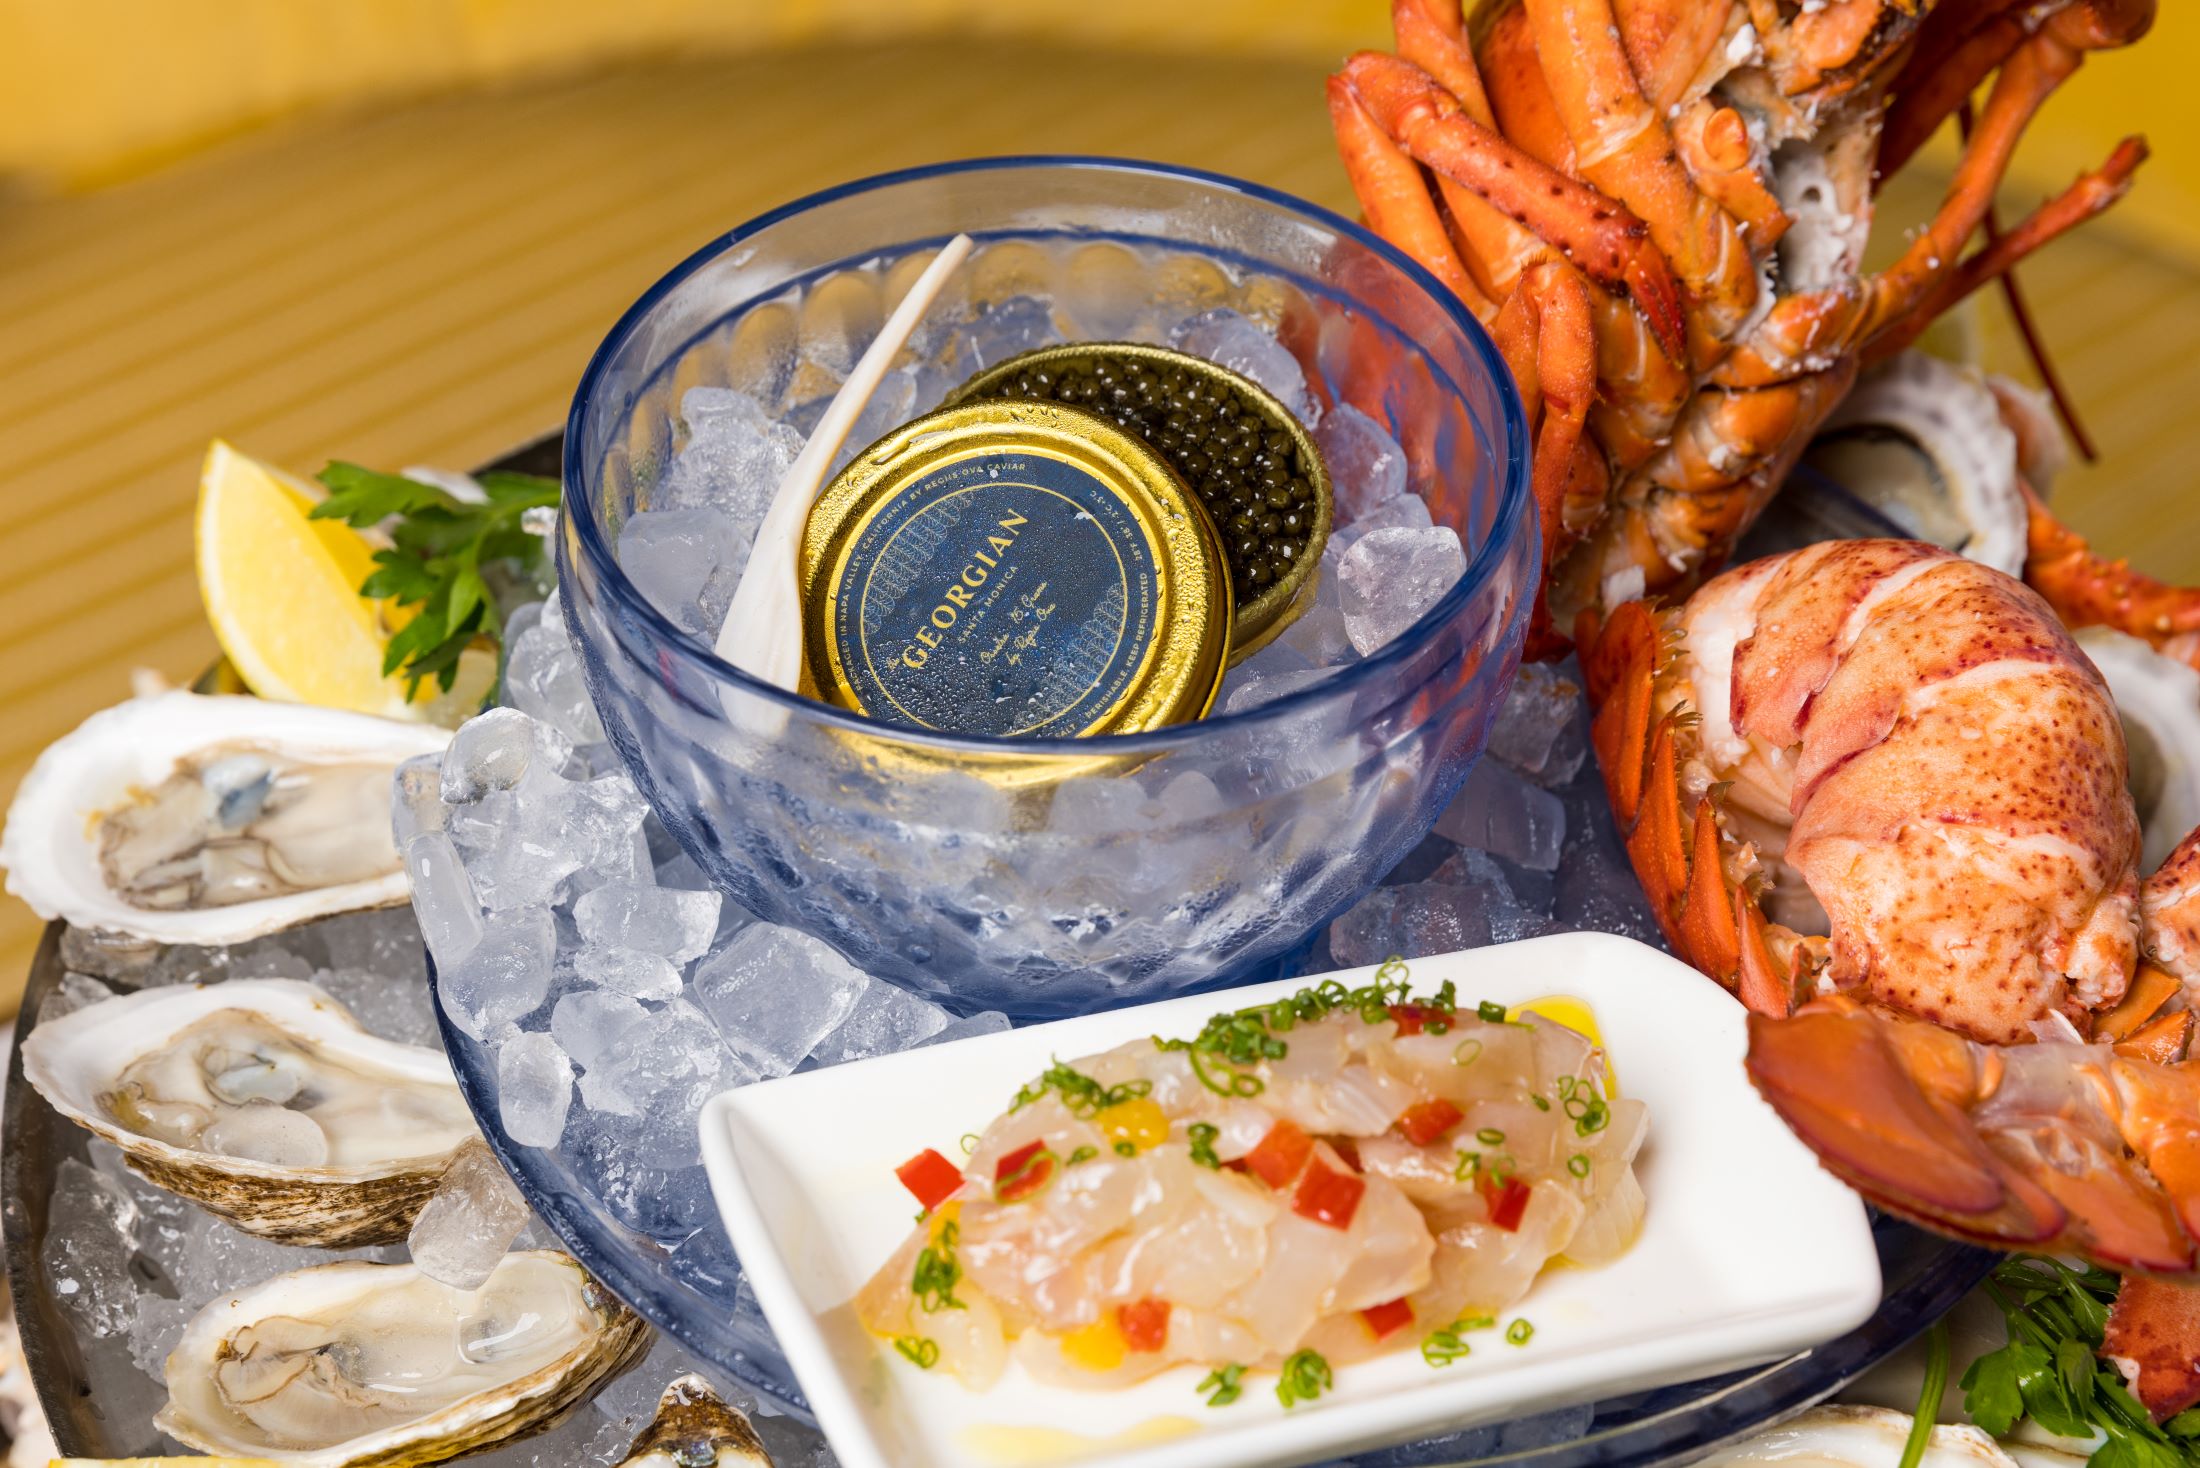 An image of caviar surrounded by oysters and lobster.